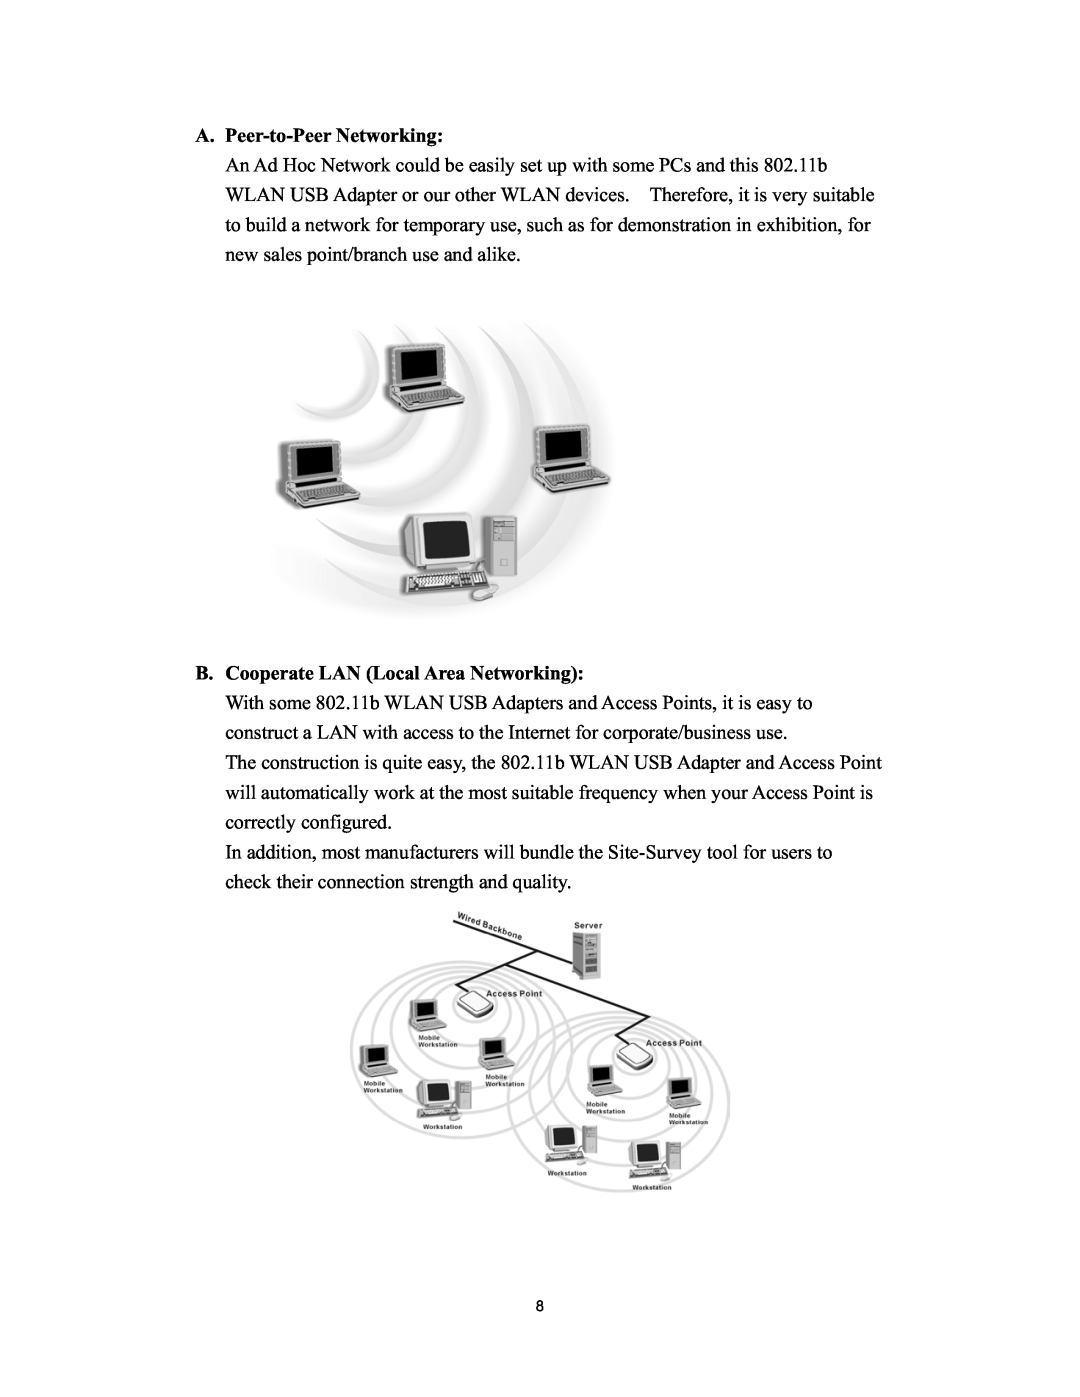 Hawking Technology H-WU300 manual A. Peer-to-Peer Networking, B. Cooperate LAN Local Area Networking 